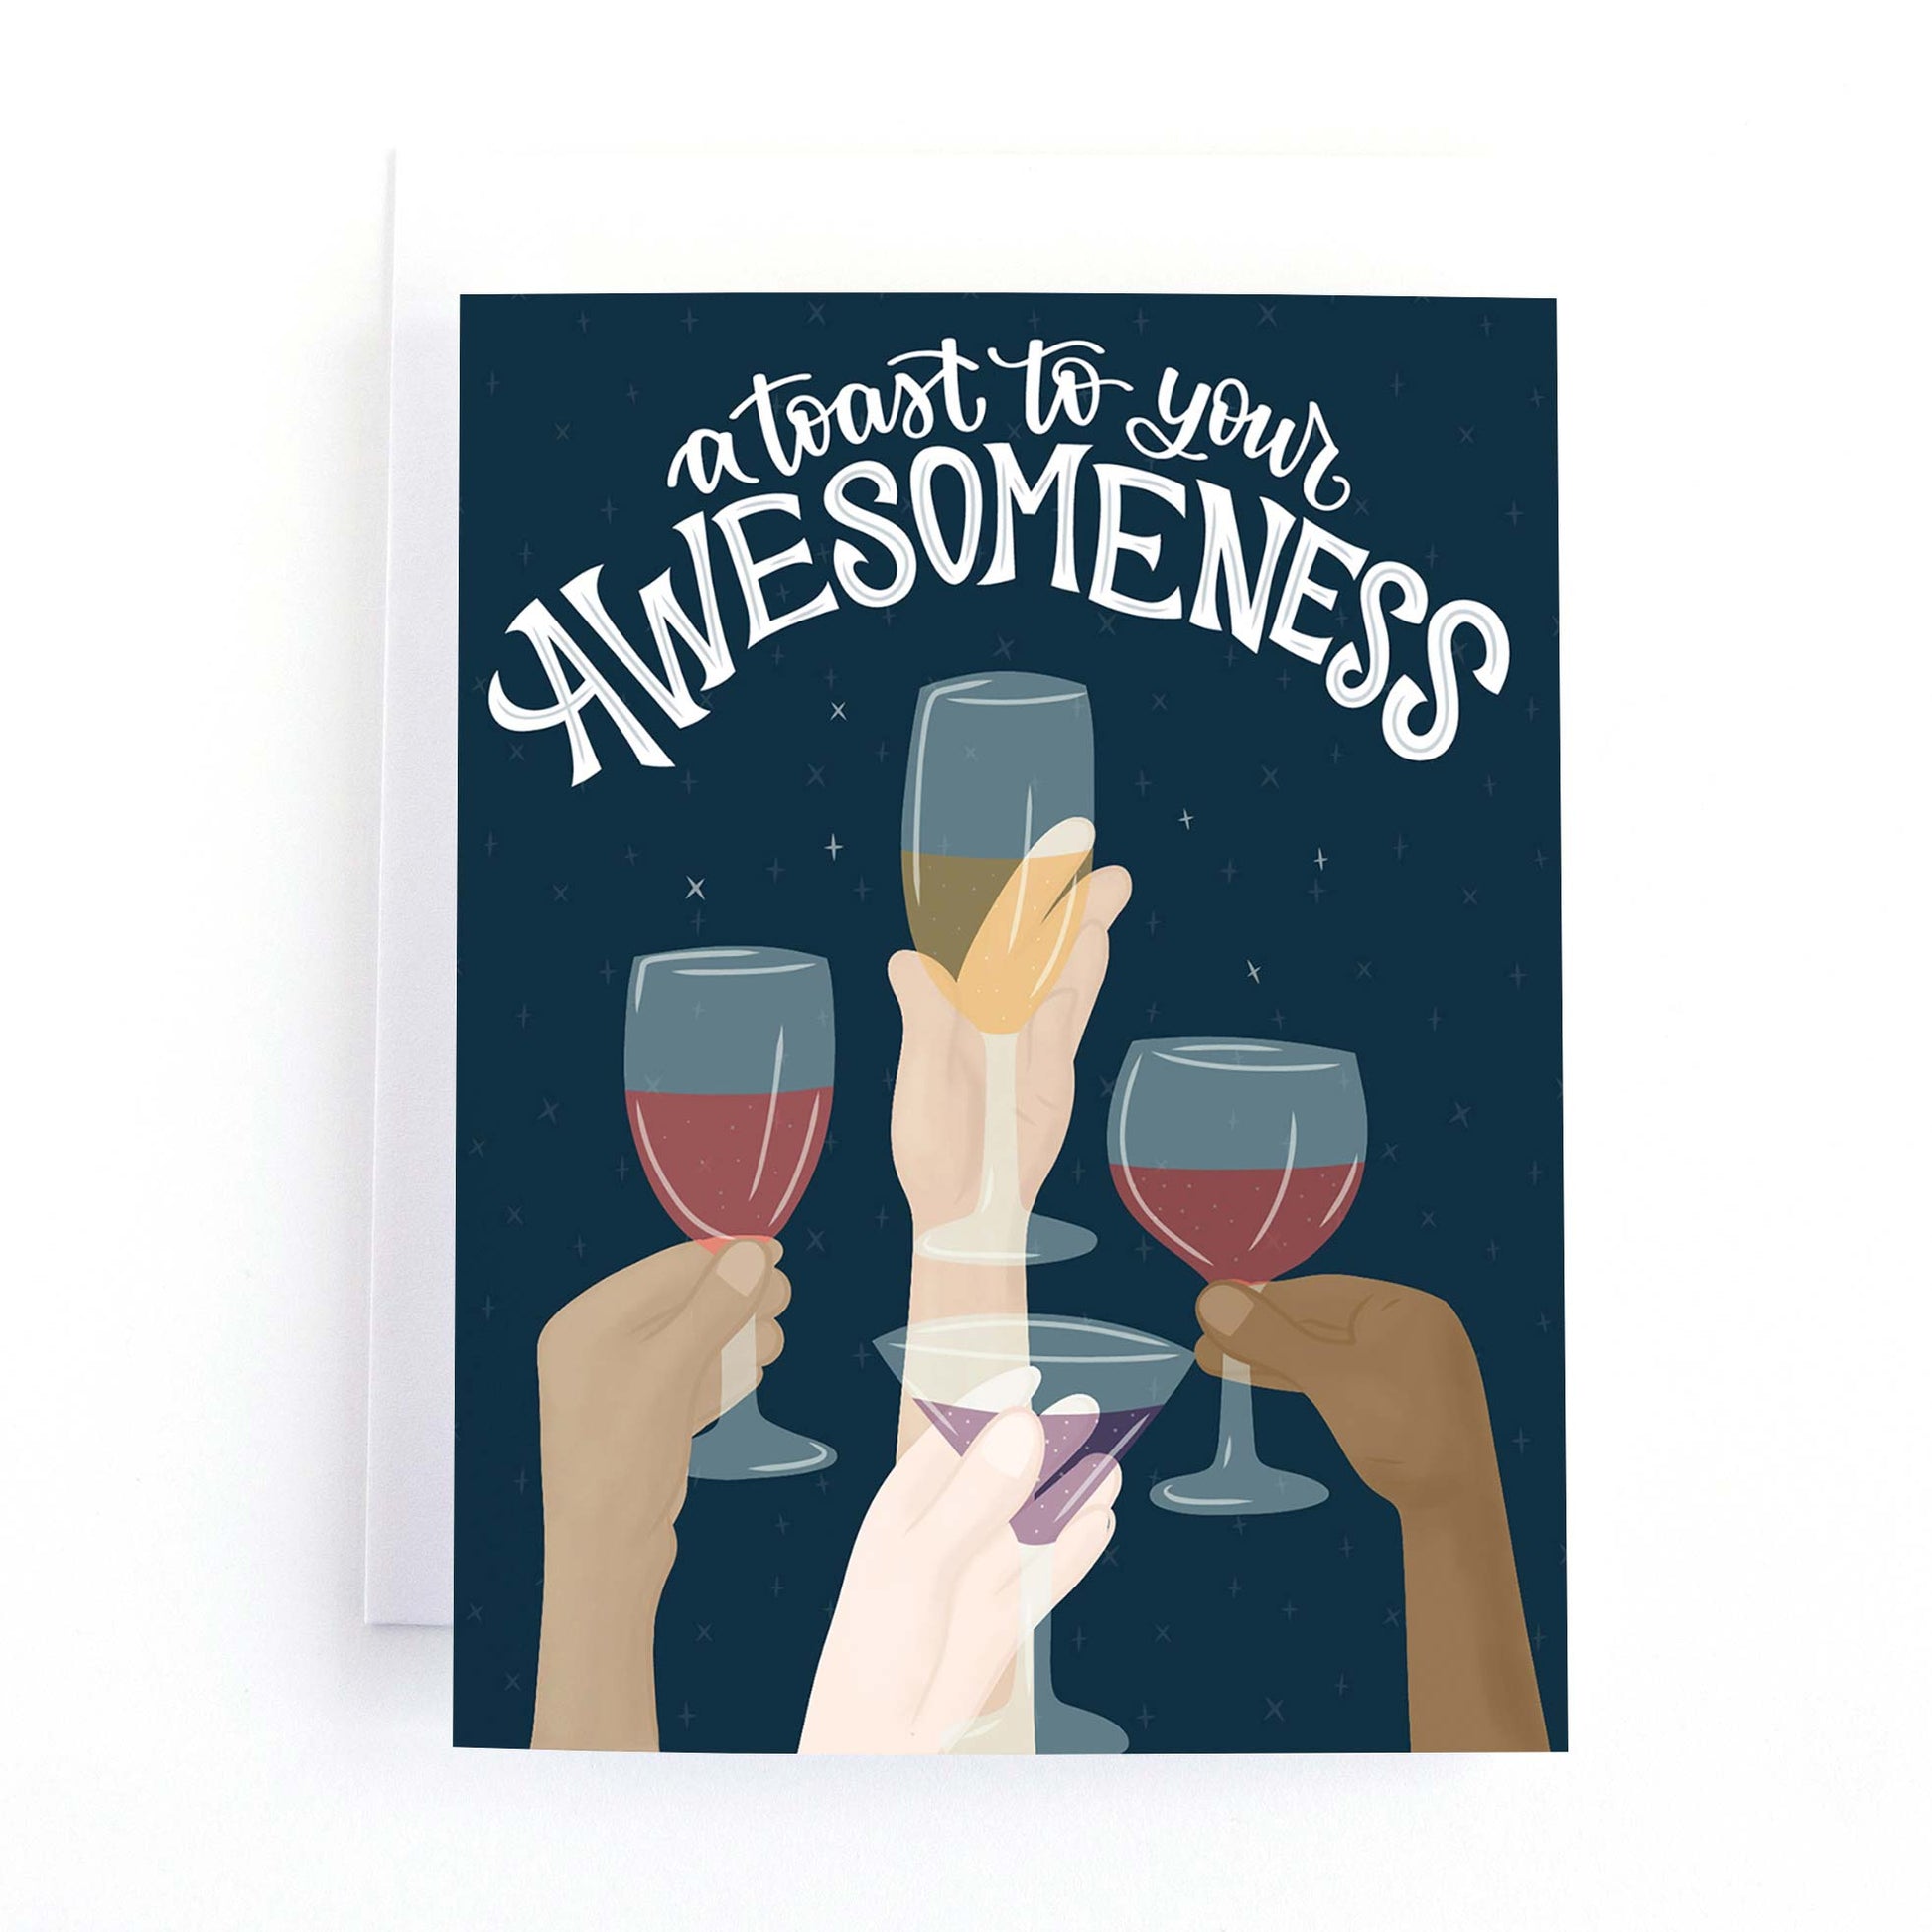 A congratulations card that features several hands making a toast and the text, "a toast to your awesomeness"